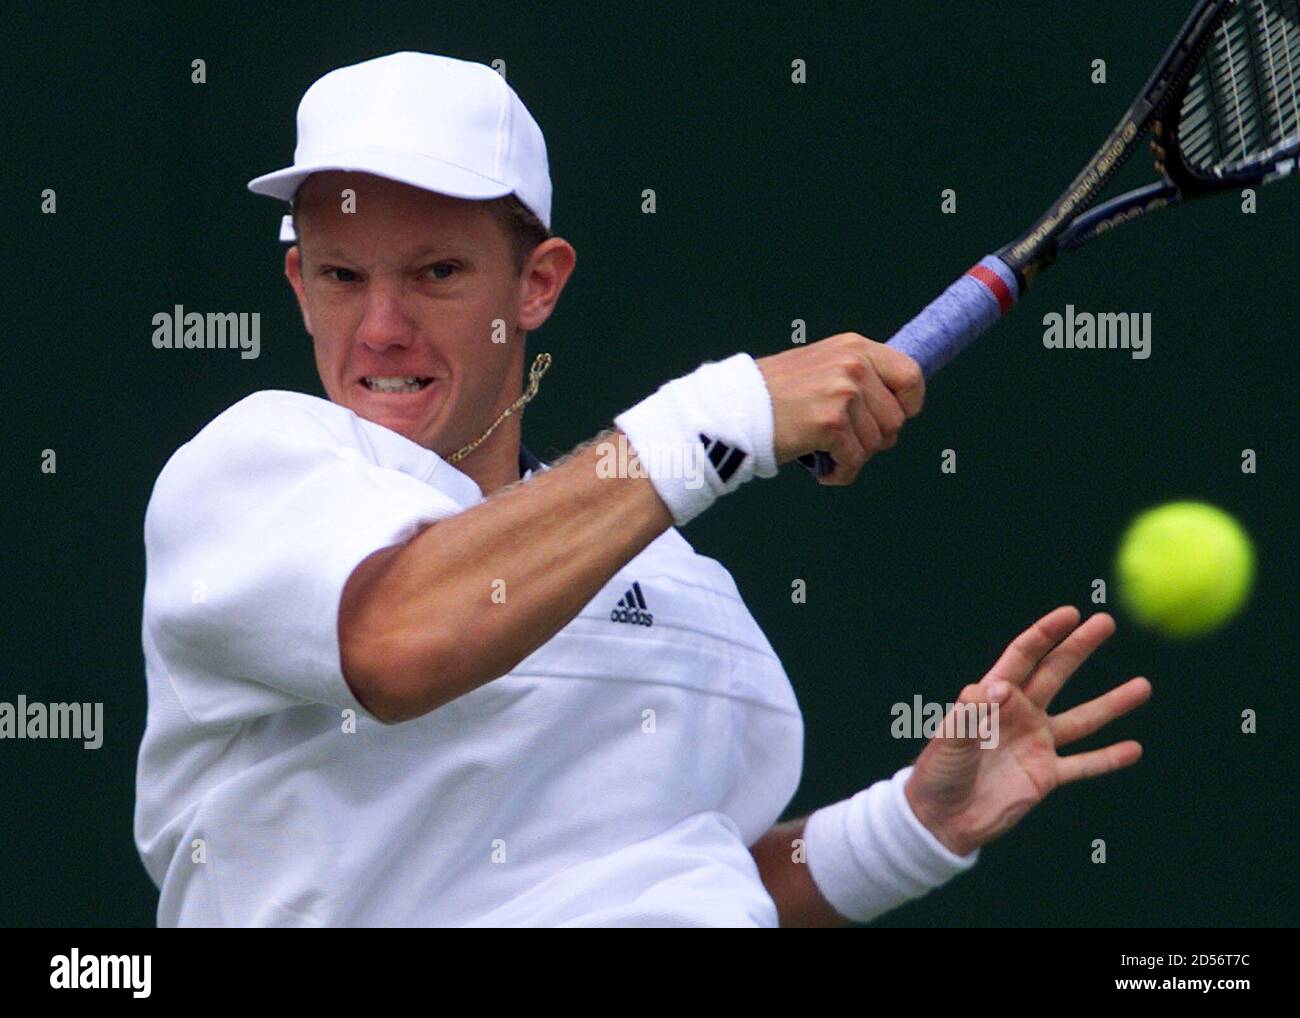 Sweden's Thomas Johansson hits a forehand return to Richey Reneberg of the  U.S. during their first round match at the Wimbledon Tennis Championships  June 21. Johansson is currently ranked number 21 in